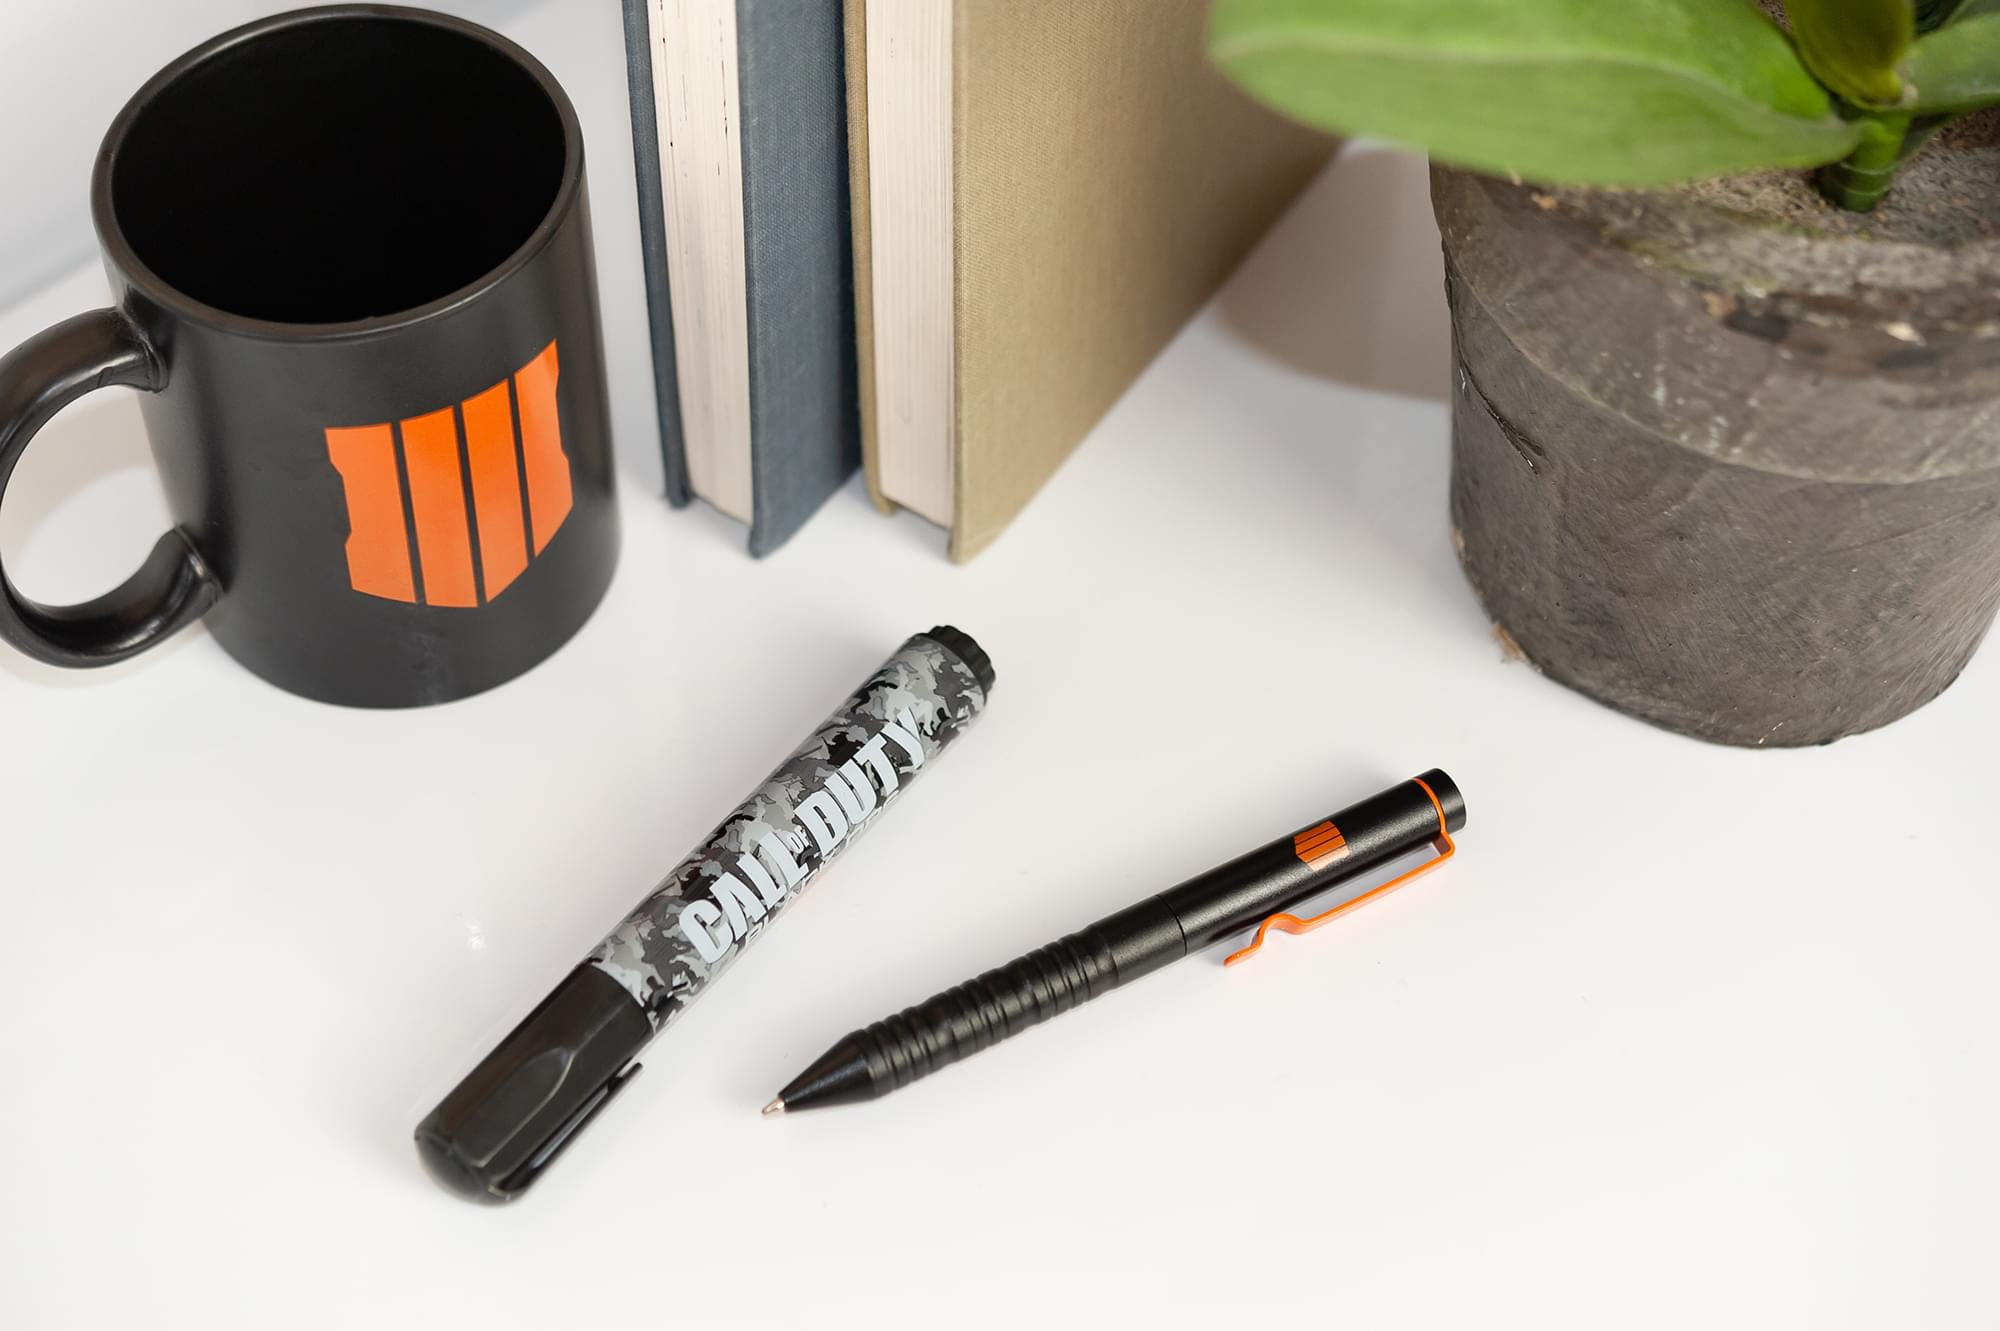 OFFICIAL Call of duty Pen Gift Set Boxed Black Ink Home Schooling Writing Marker 